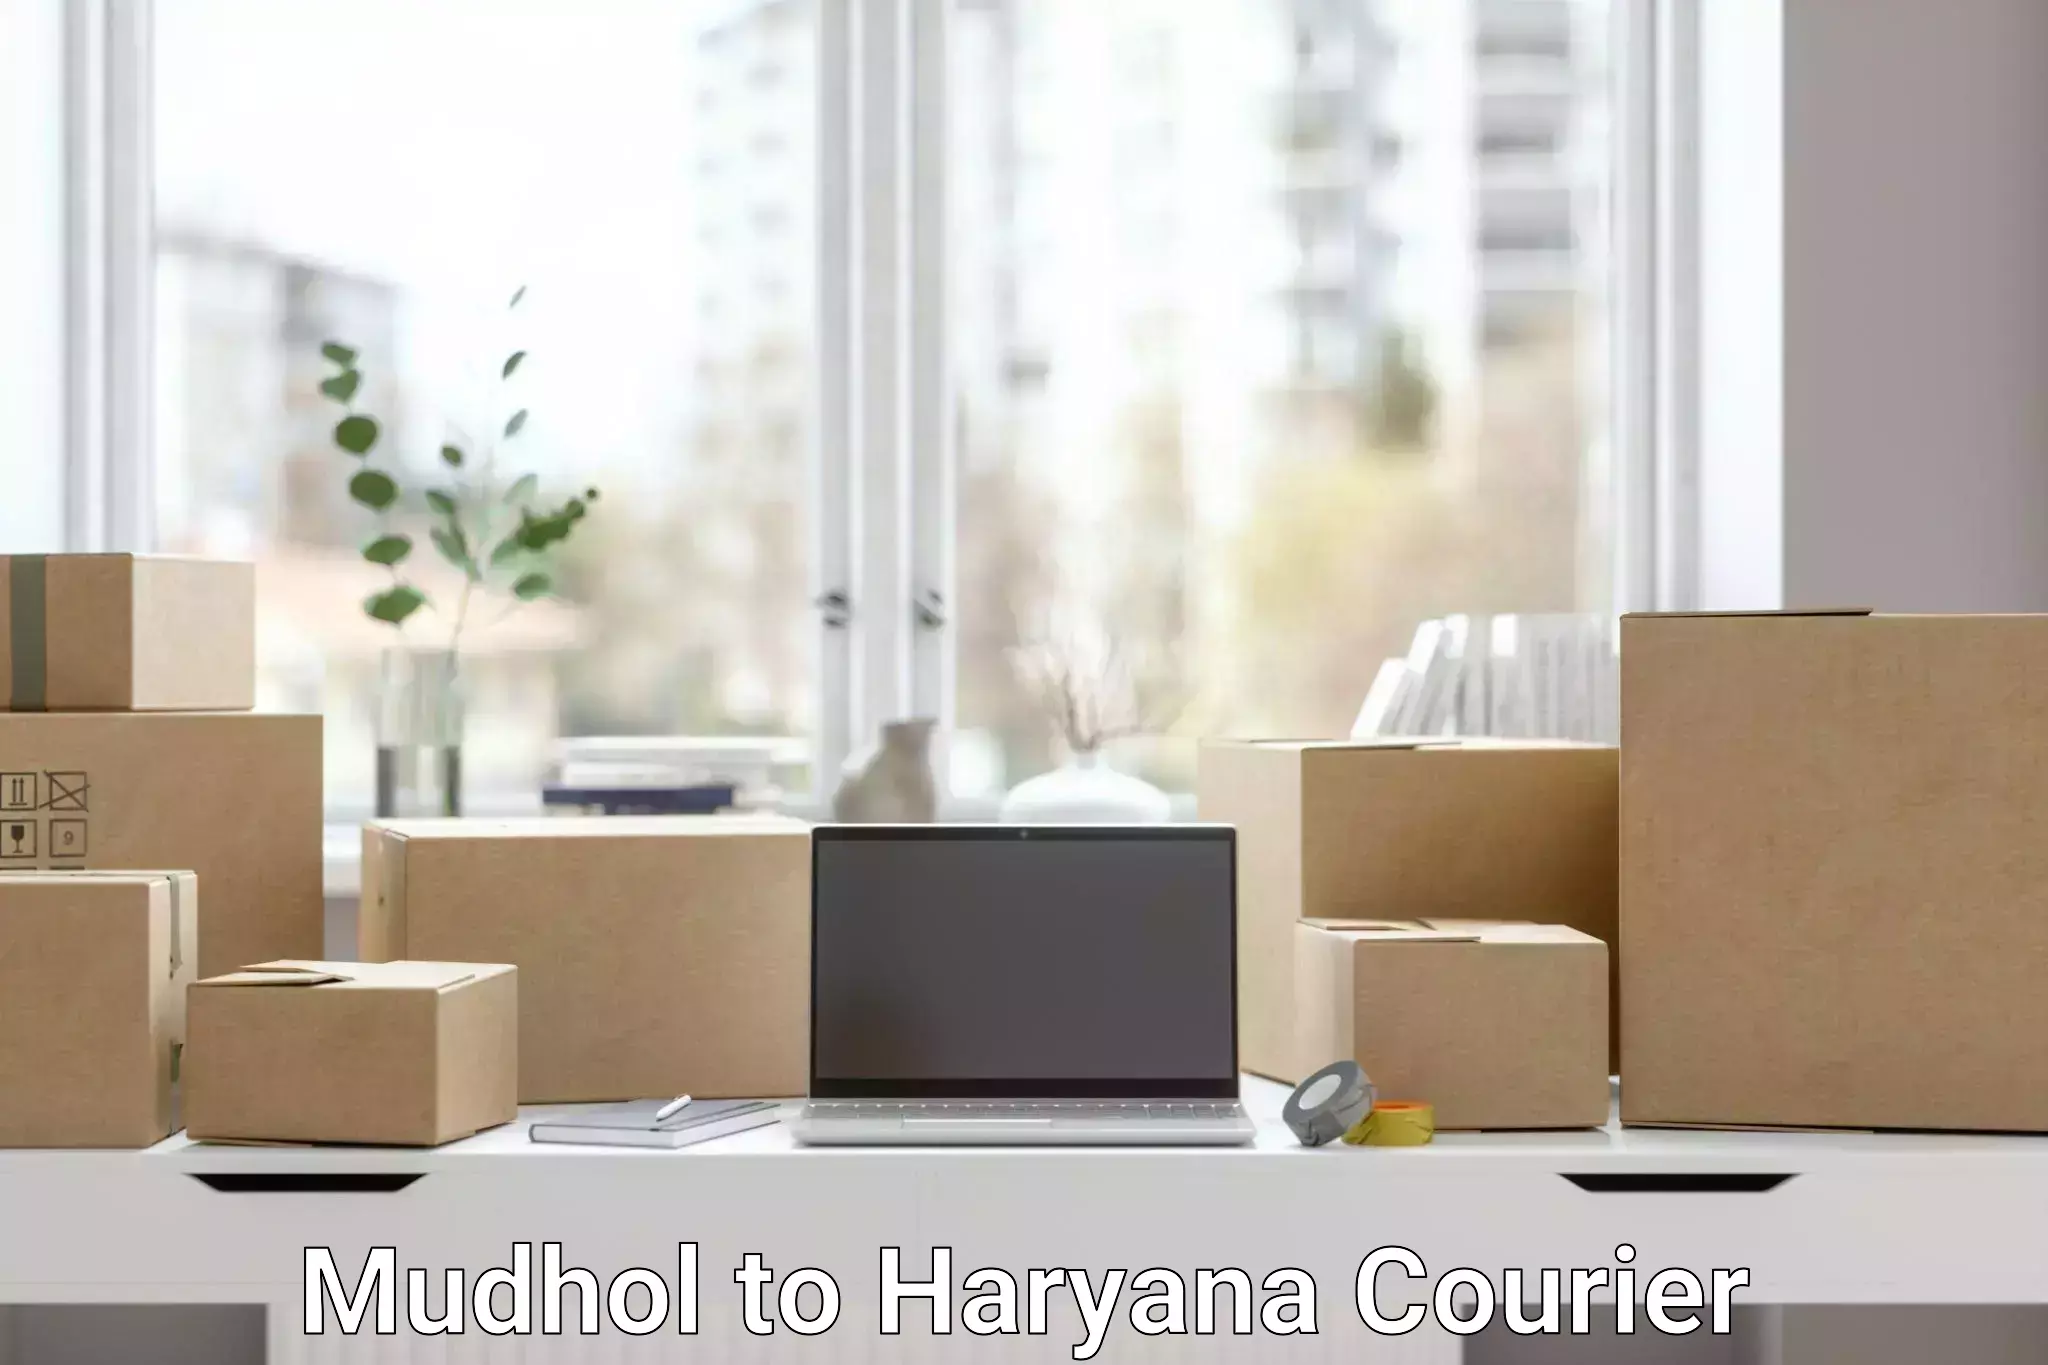 Local delivery service Mudhol to Bilaspur Haryana